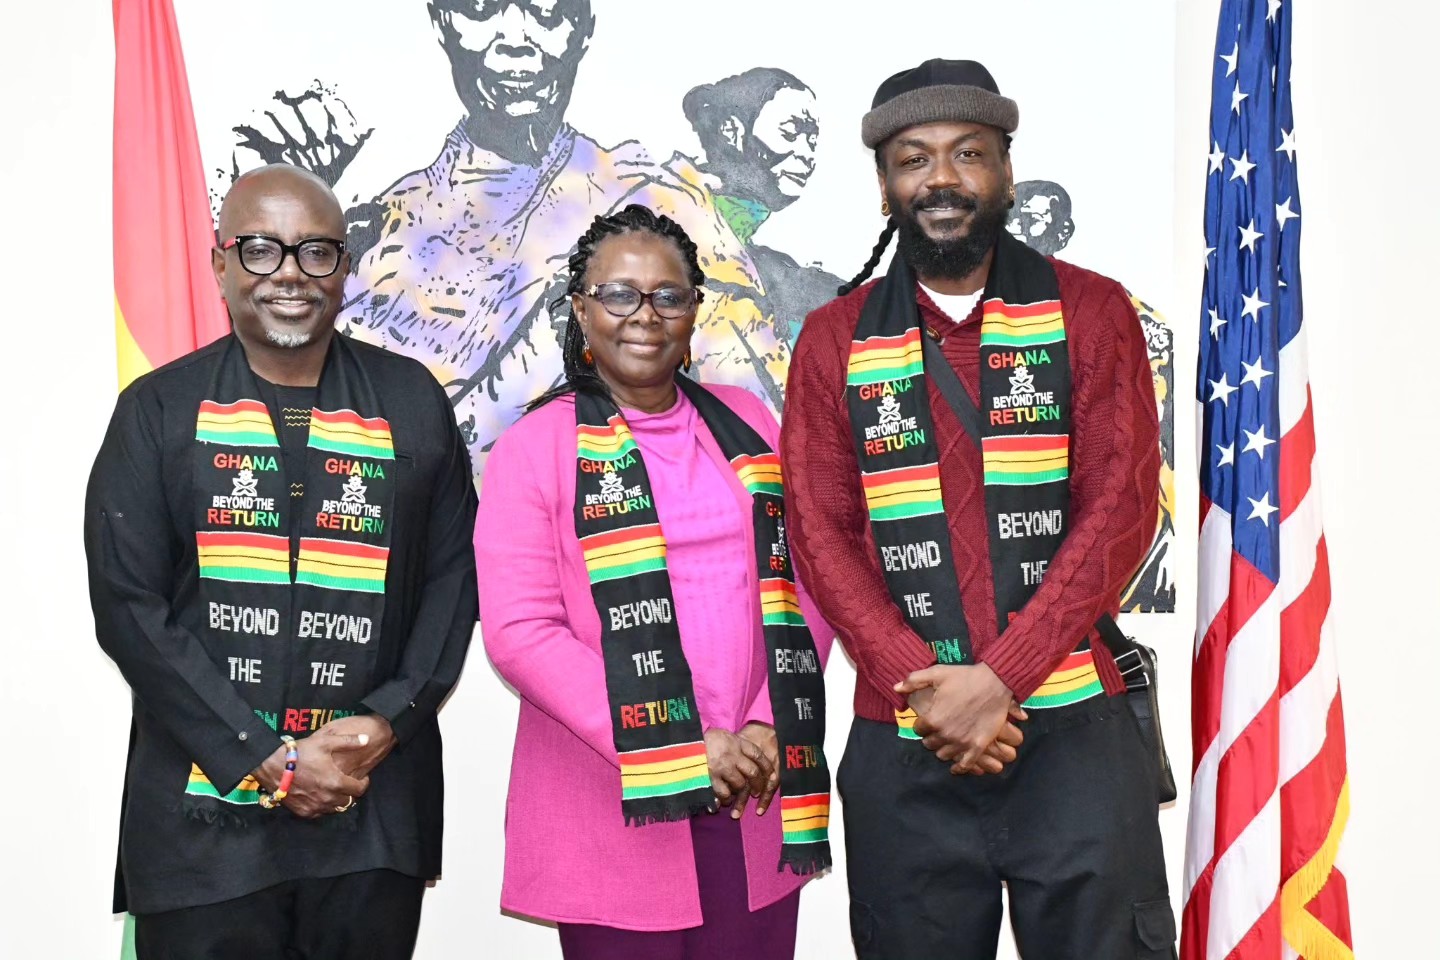 Read more about the article Ghana Tourism Authority & Beyond the Return Visit Ghana Embassy in Washington DC with Samini